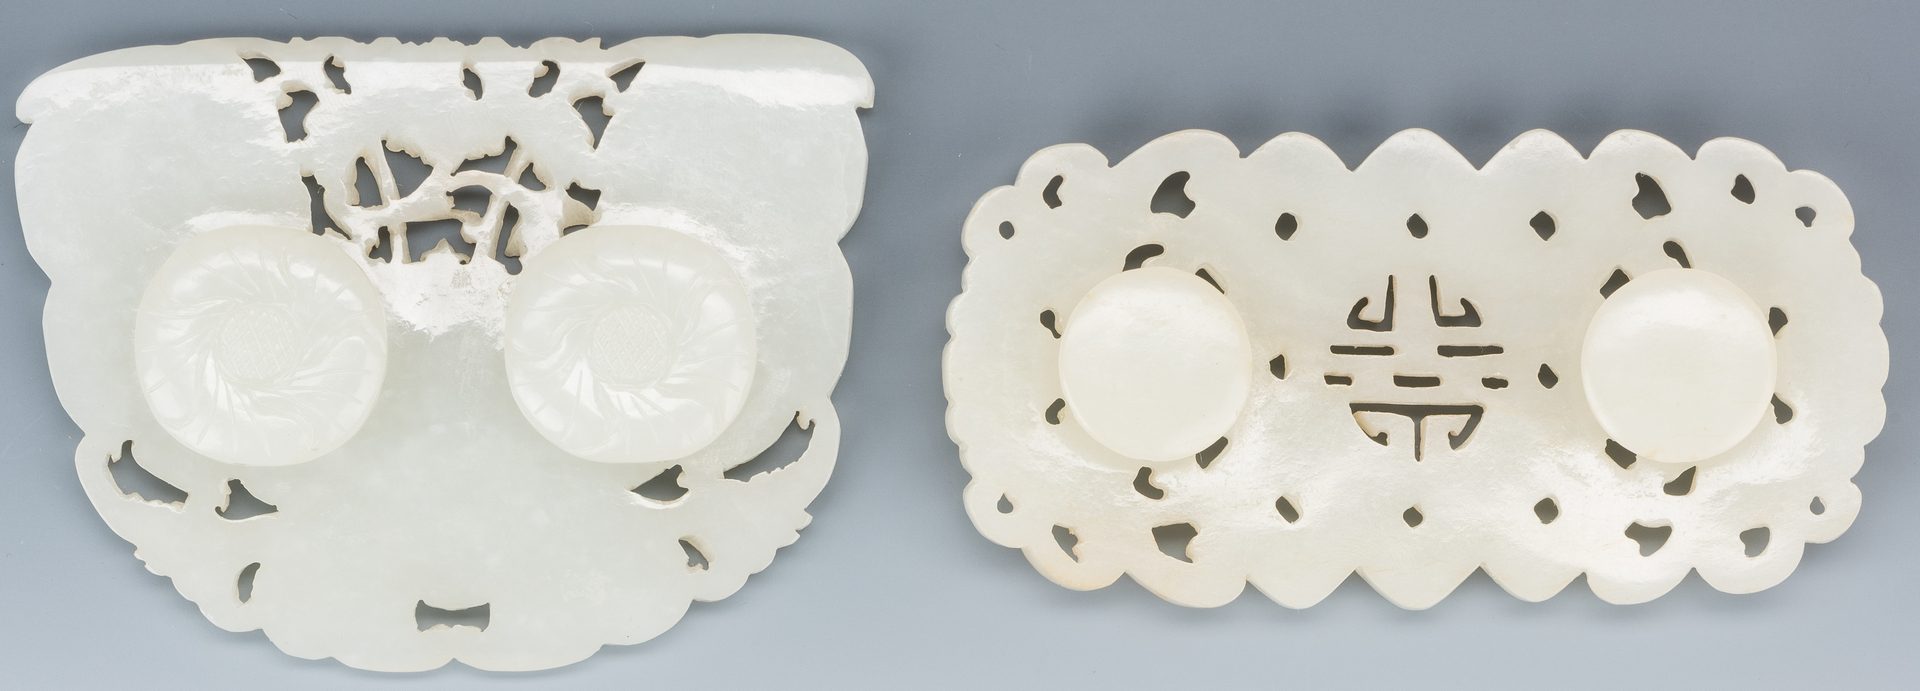 Lot 1: 2 Chinese White/Pale Celadon Carved Belt Buckles